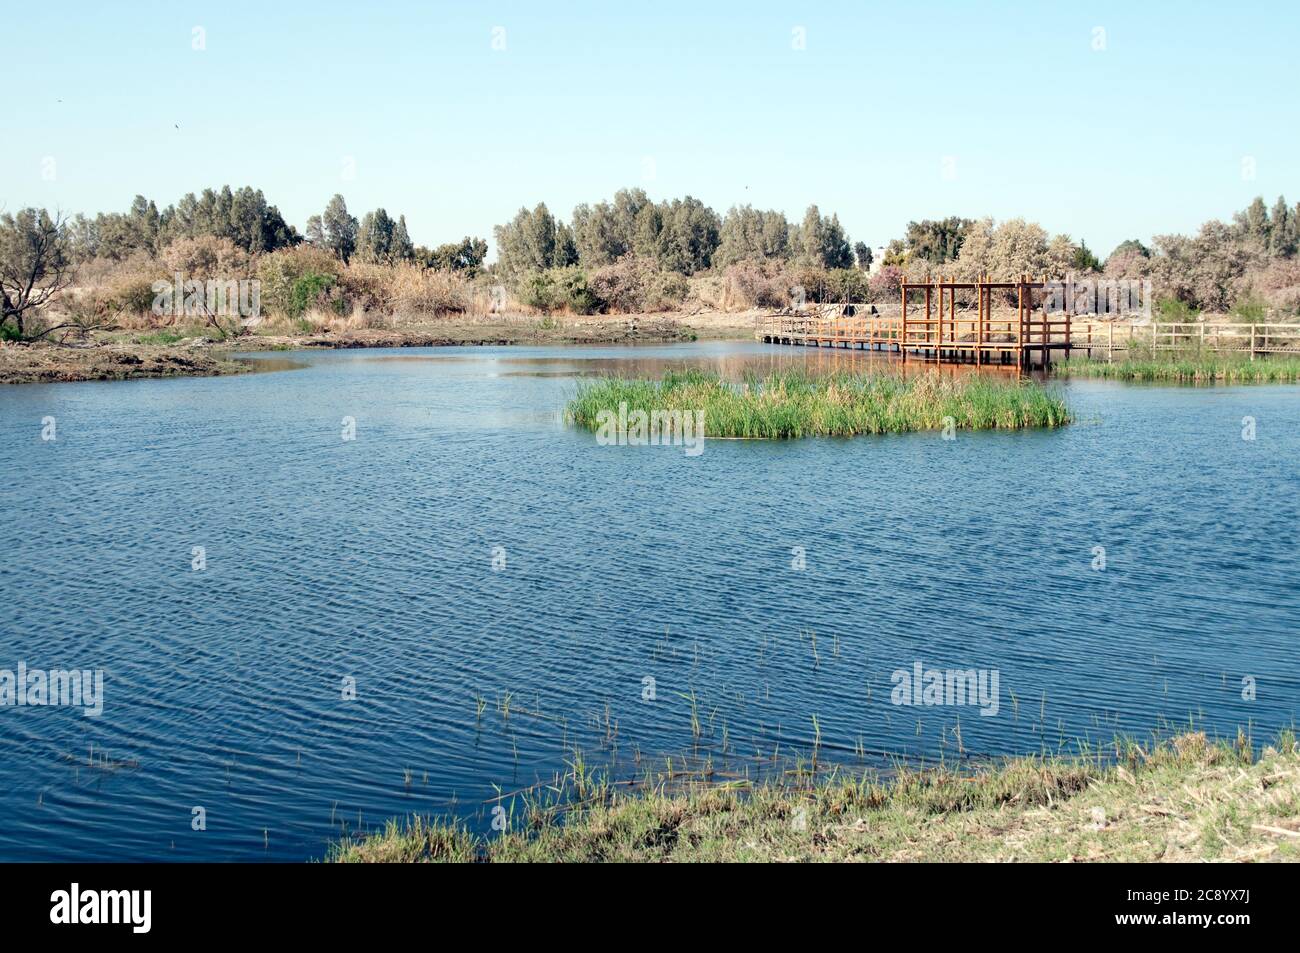 A fresh water pool and trees in Azraq Wetland Reserve and oasis in the Eastern Desert area of the Badia region in the Hashemite Kingdom of Jordan. Stock Photo